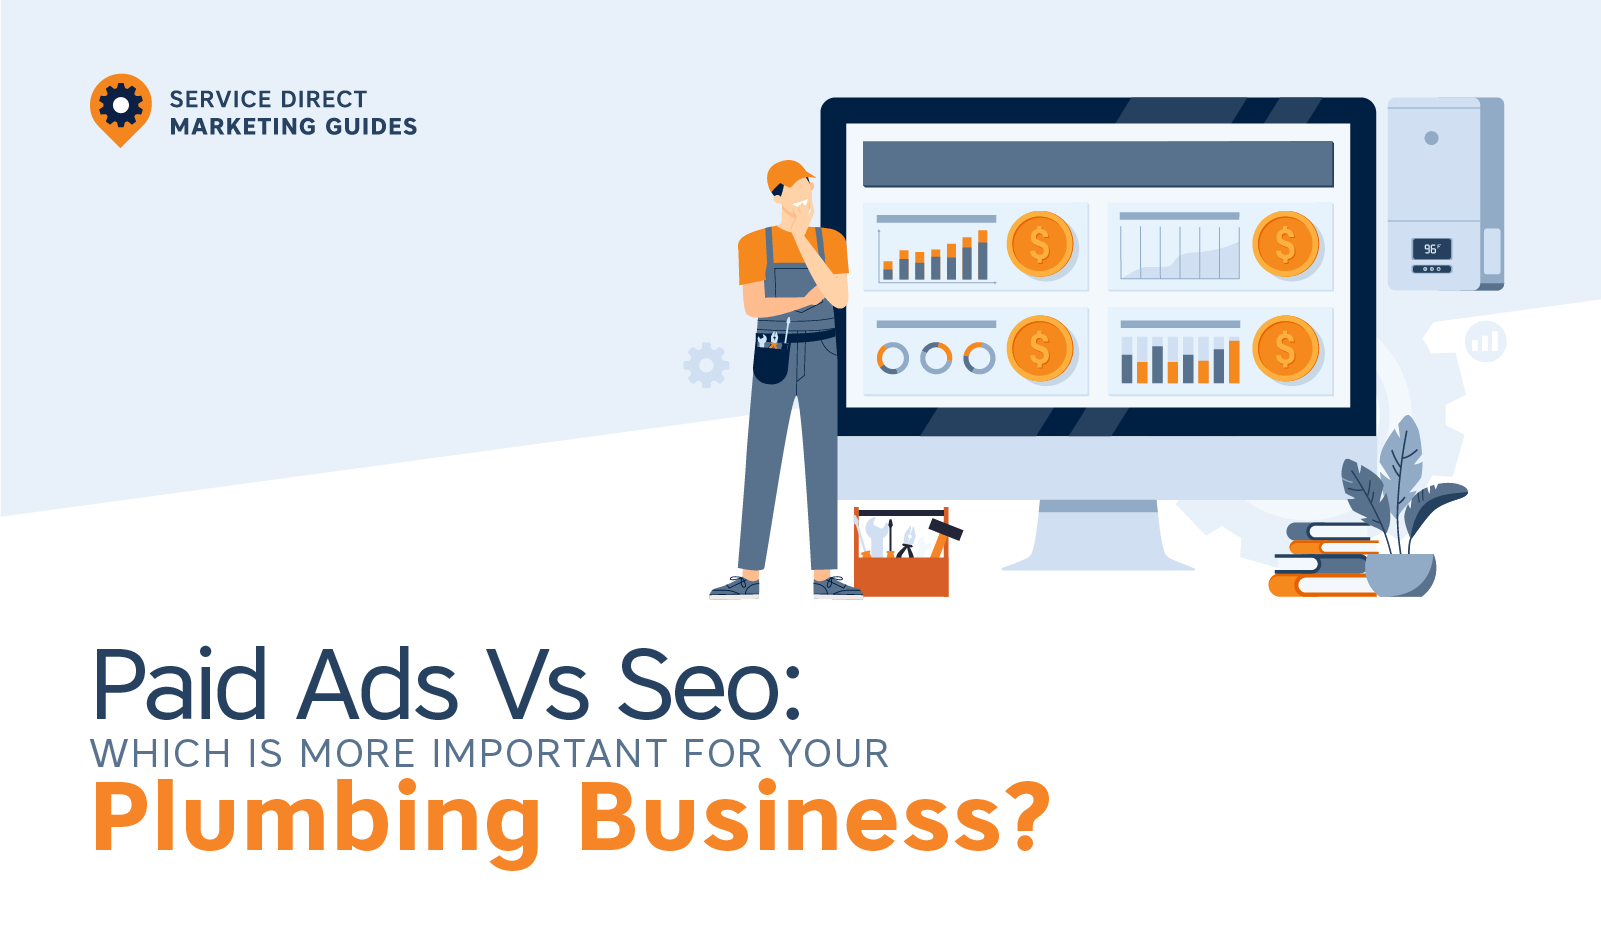 Paid Ads vs SEO which is better for your plumbing business header image